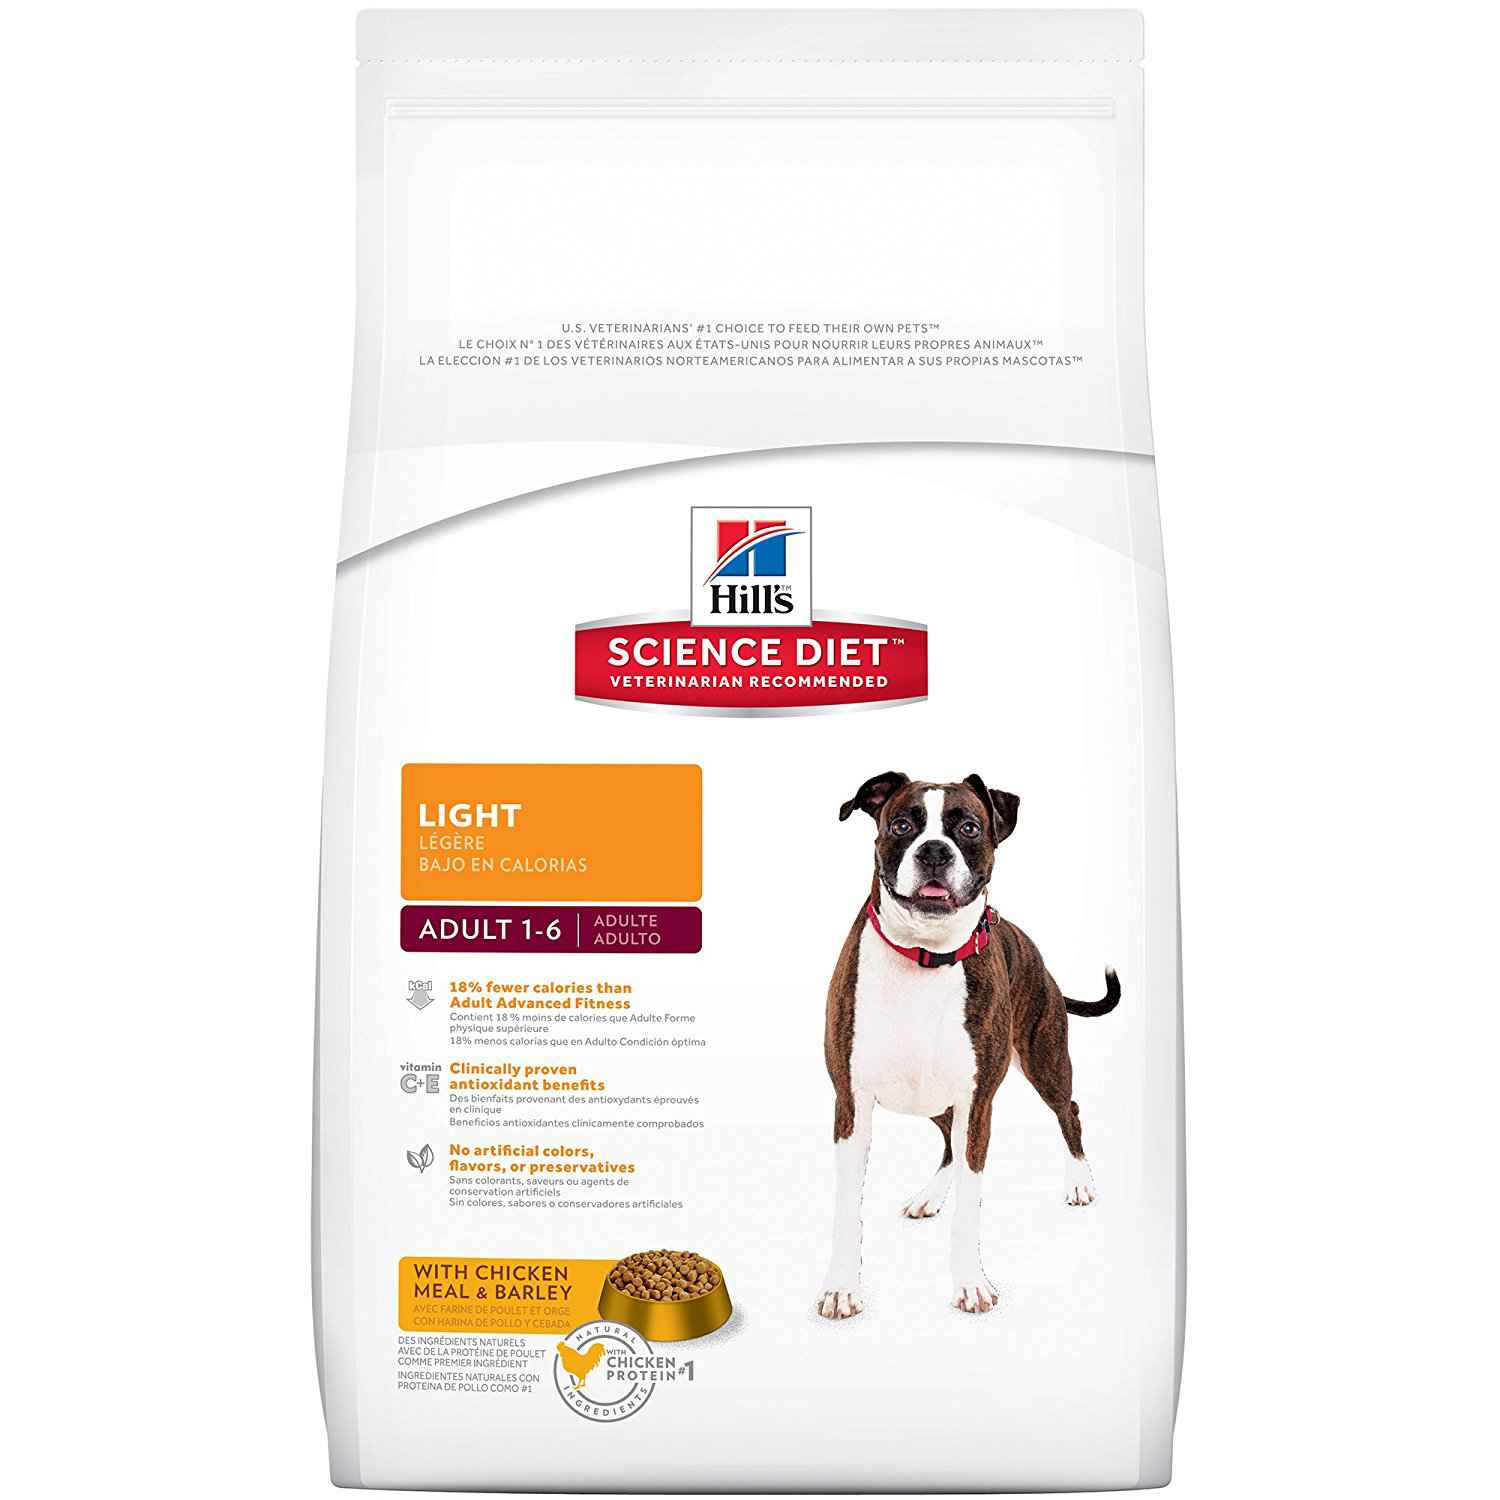 Advanced Fitness Original Dog Food - Veterinary Discussions